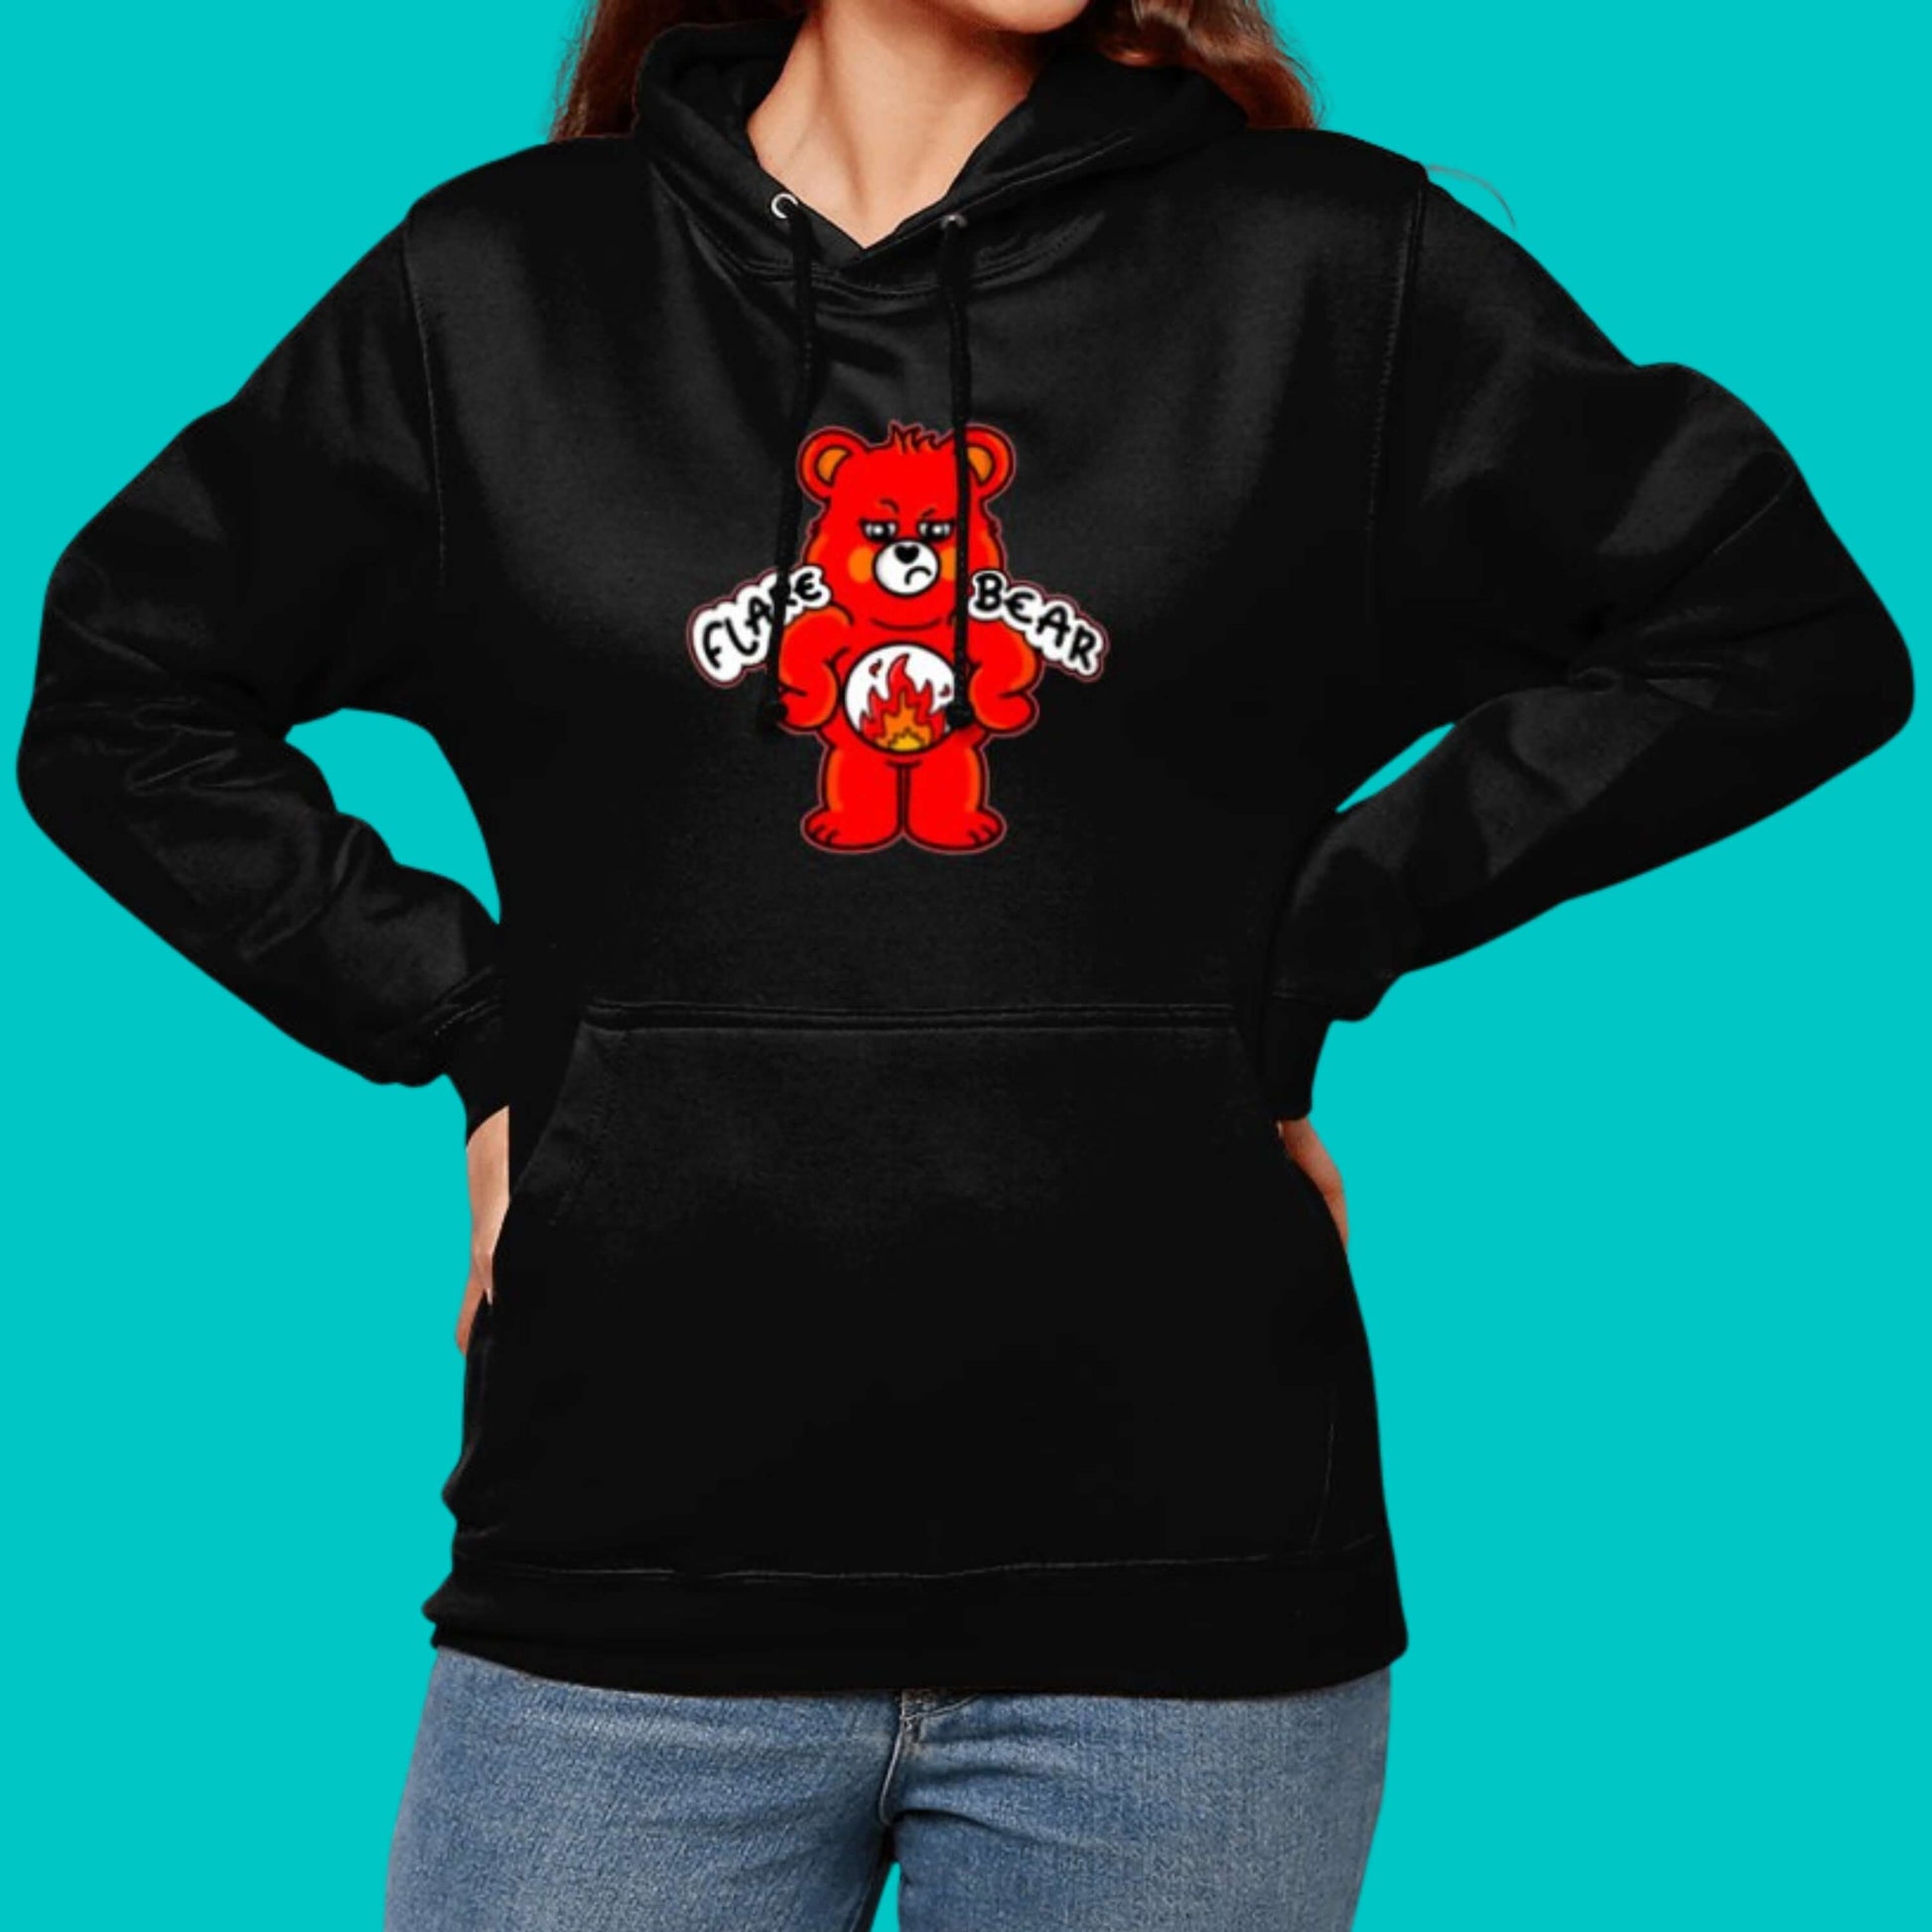 Flare Bear black hoodie jumper modelled on a blue background. The hoodie is of a red bear with a fed up expression and hands on its hips. There is a white circle on its belly with flames inside. Flare Bear is written on the hoodie. The hoodie is designed to raise awareness for chronic illness flare ups.